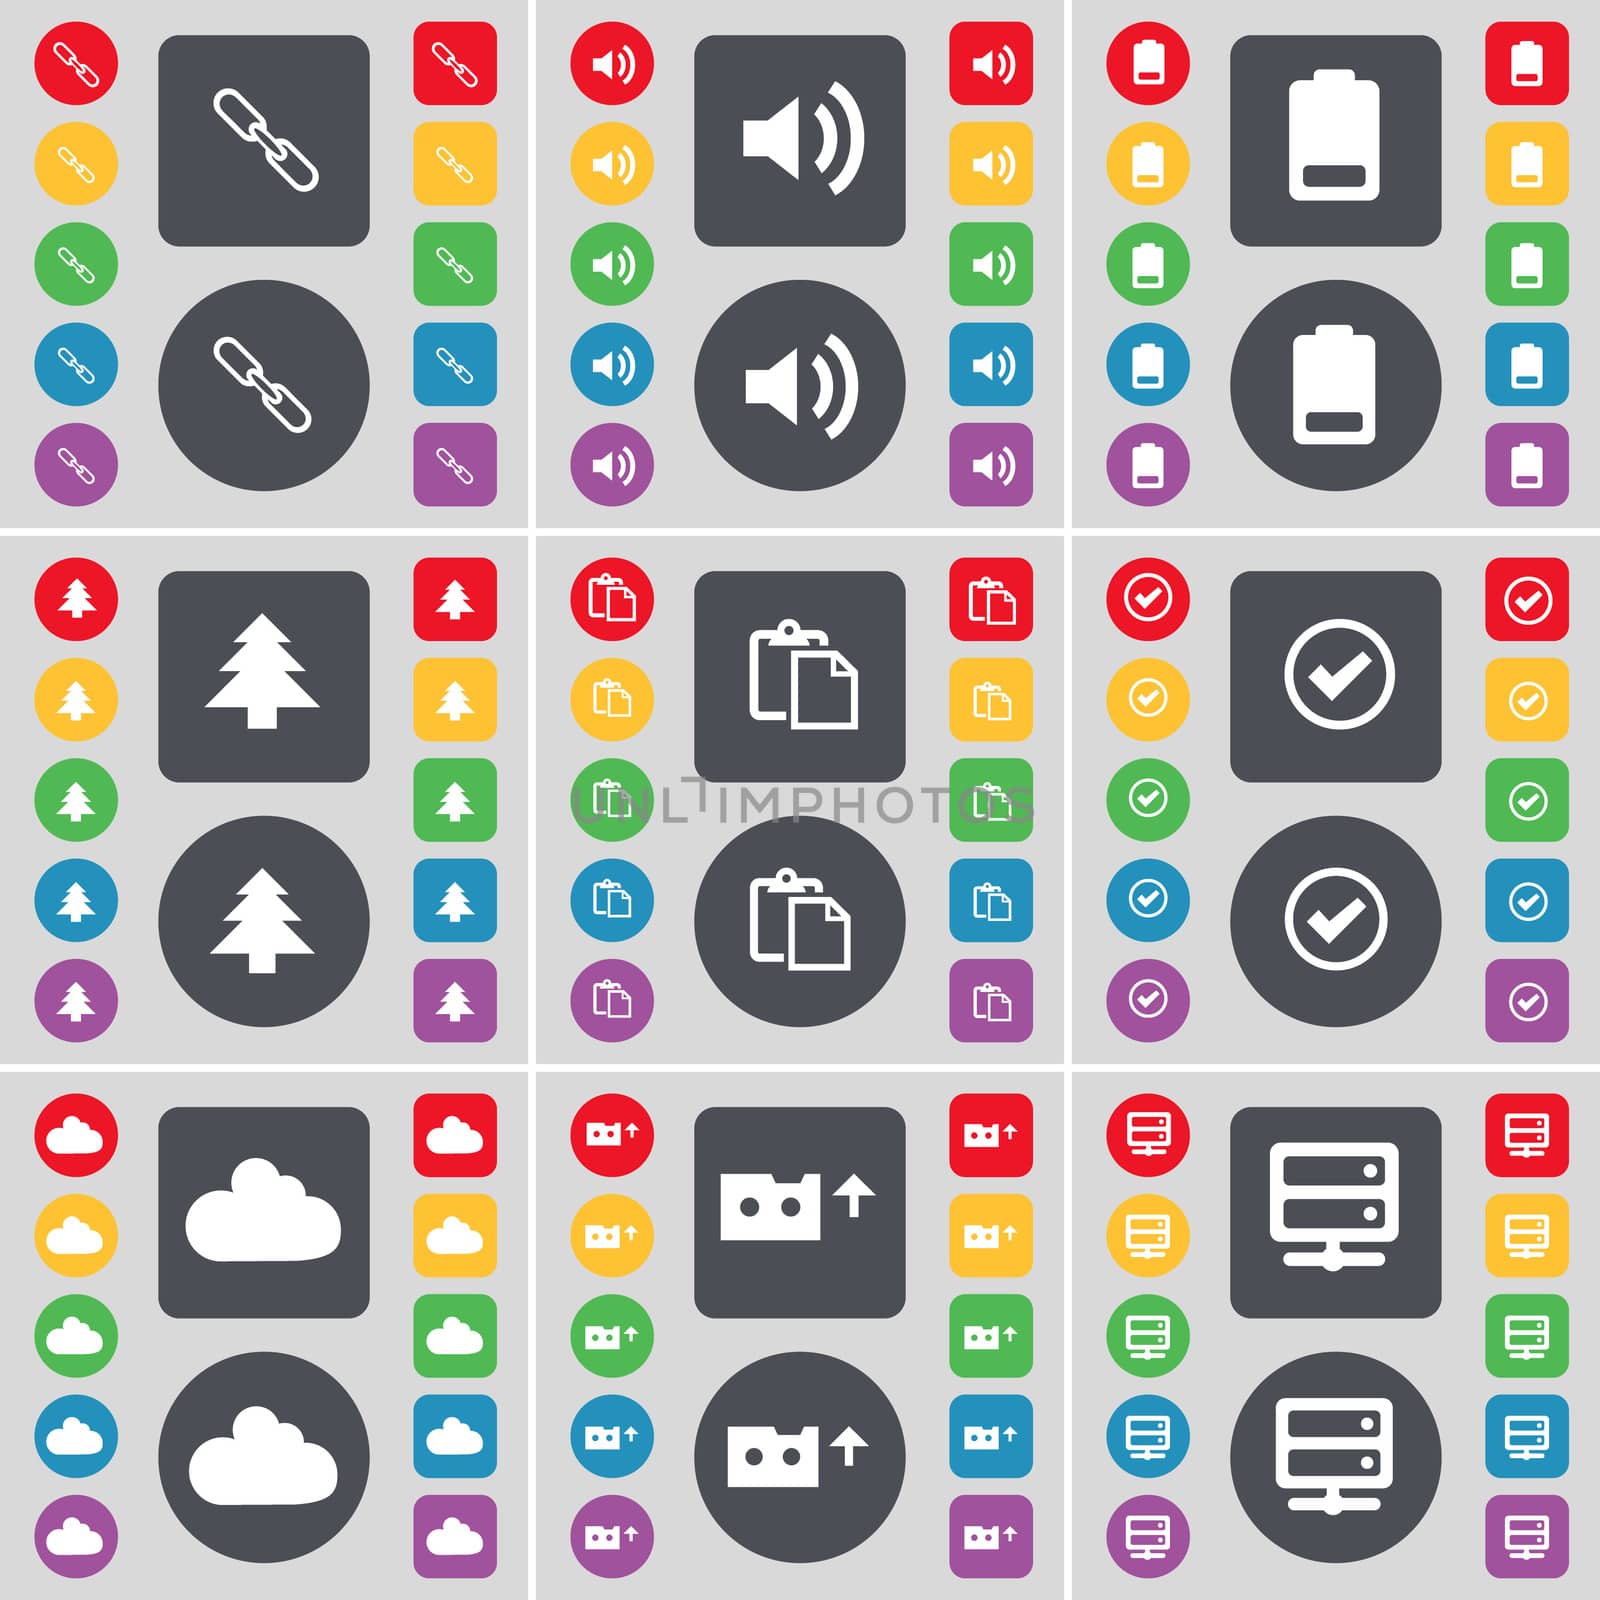 Link, Sound, Battery, Firtree, Survey, Tick, Cloud, Cassette, Server icon symbol. A large set of flat, colored buttons for your design. illustration